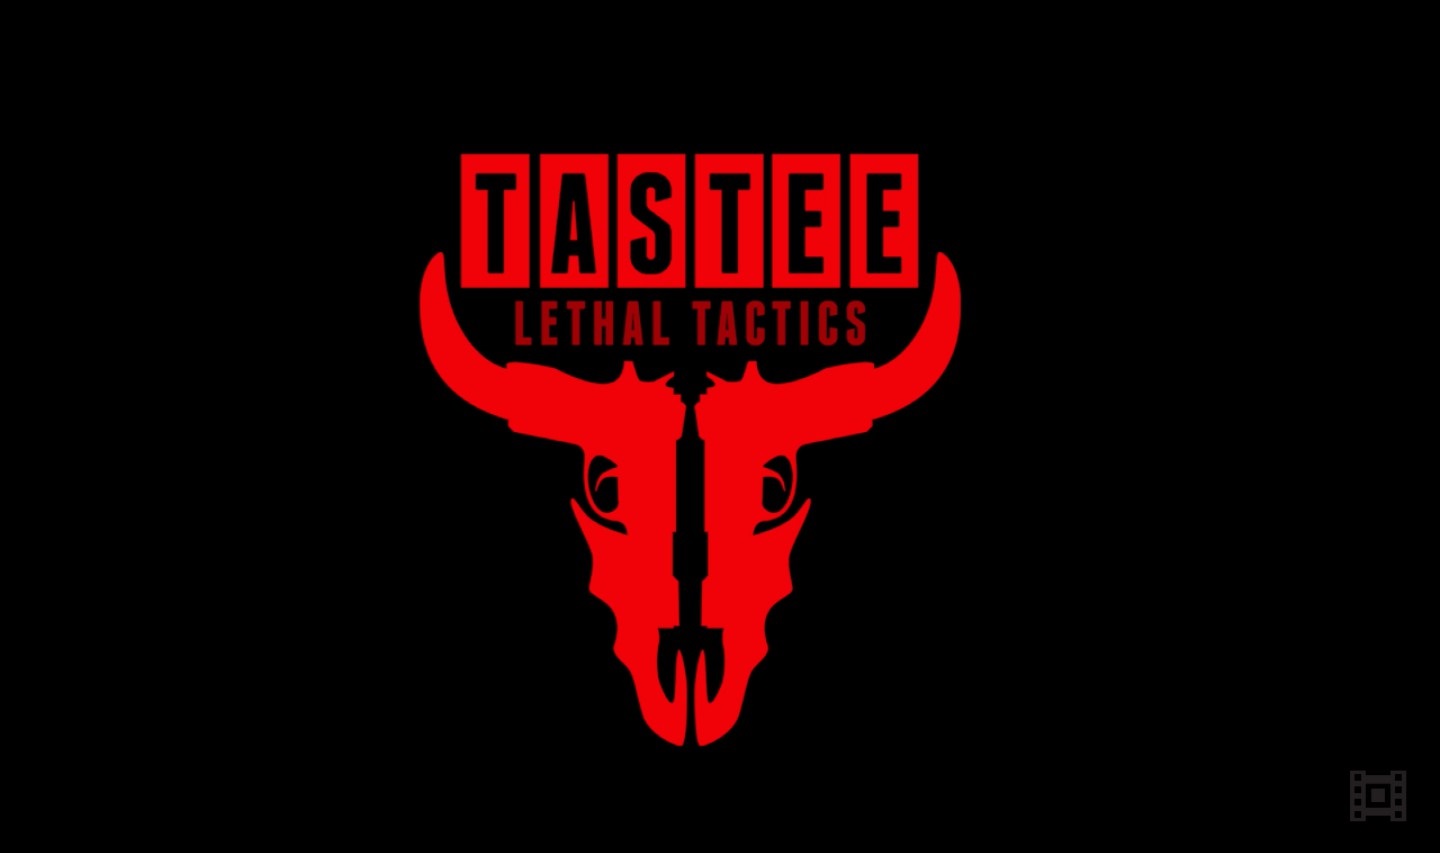 Tastee: Lethal Tactics. 3rd Strike Redemption. Lethal Company аватарка. Lethal Company монстры. Lethal company ru